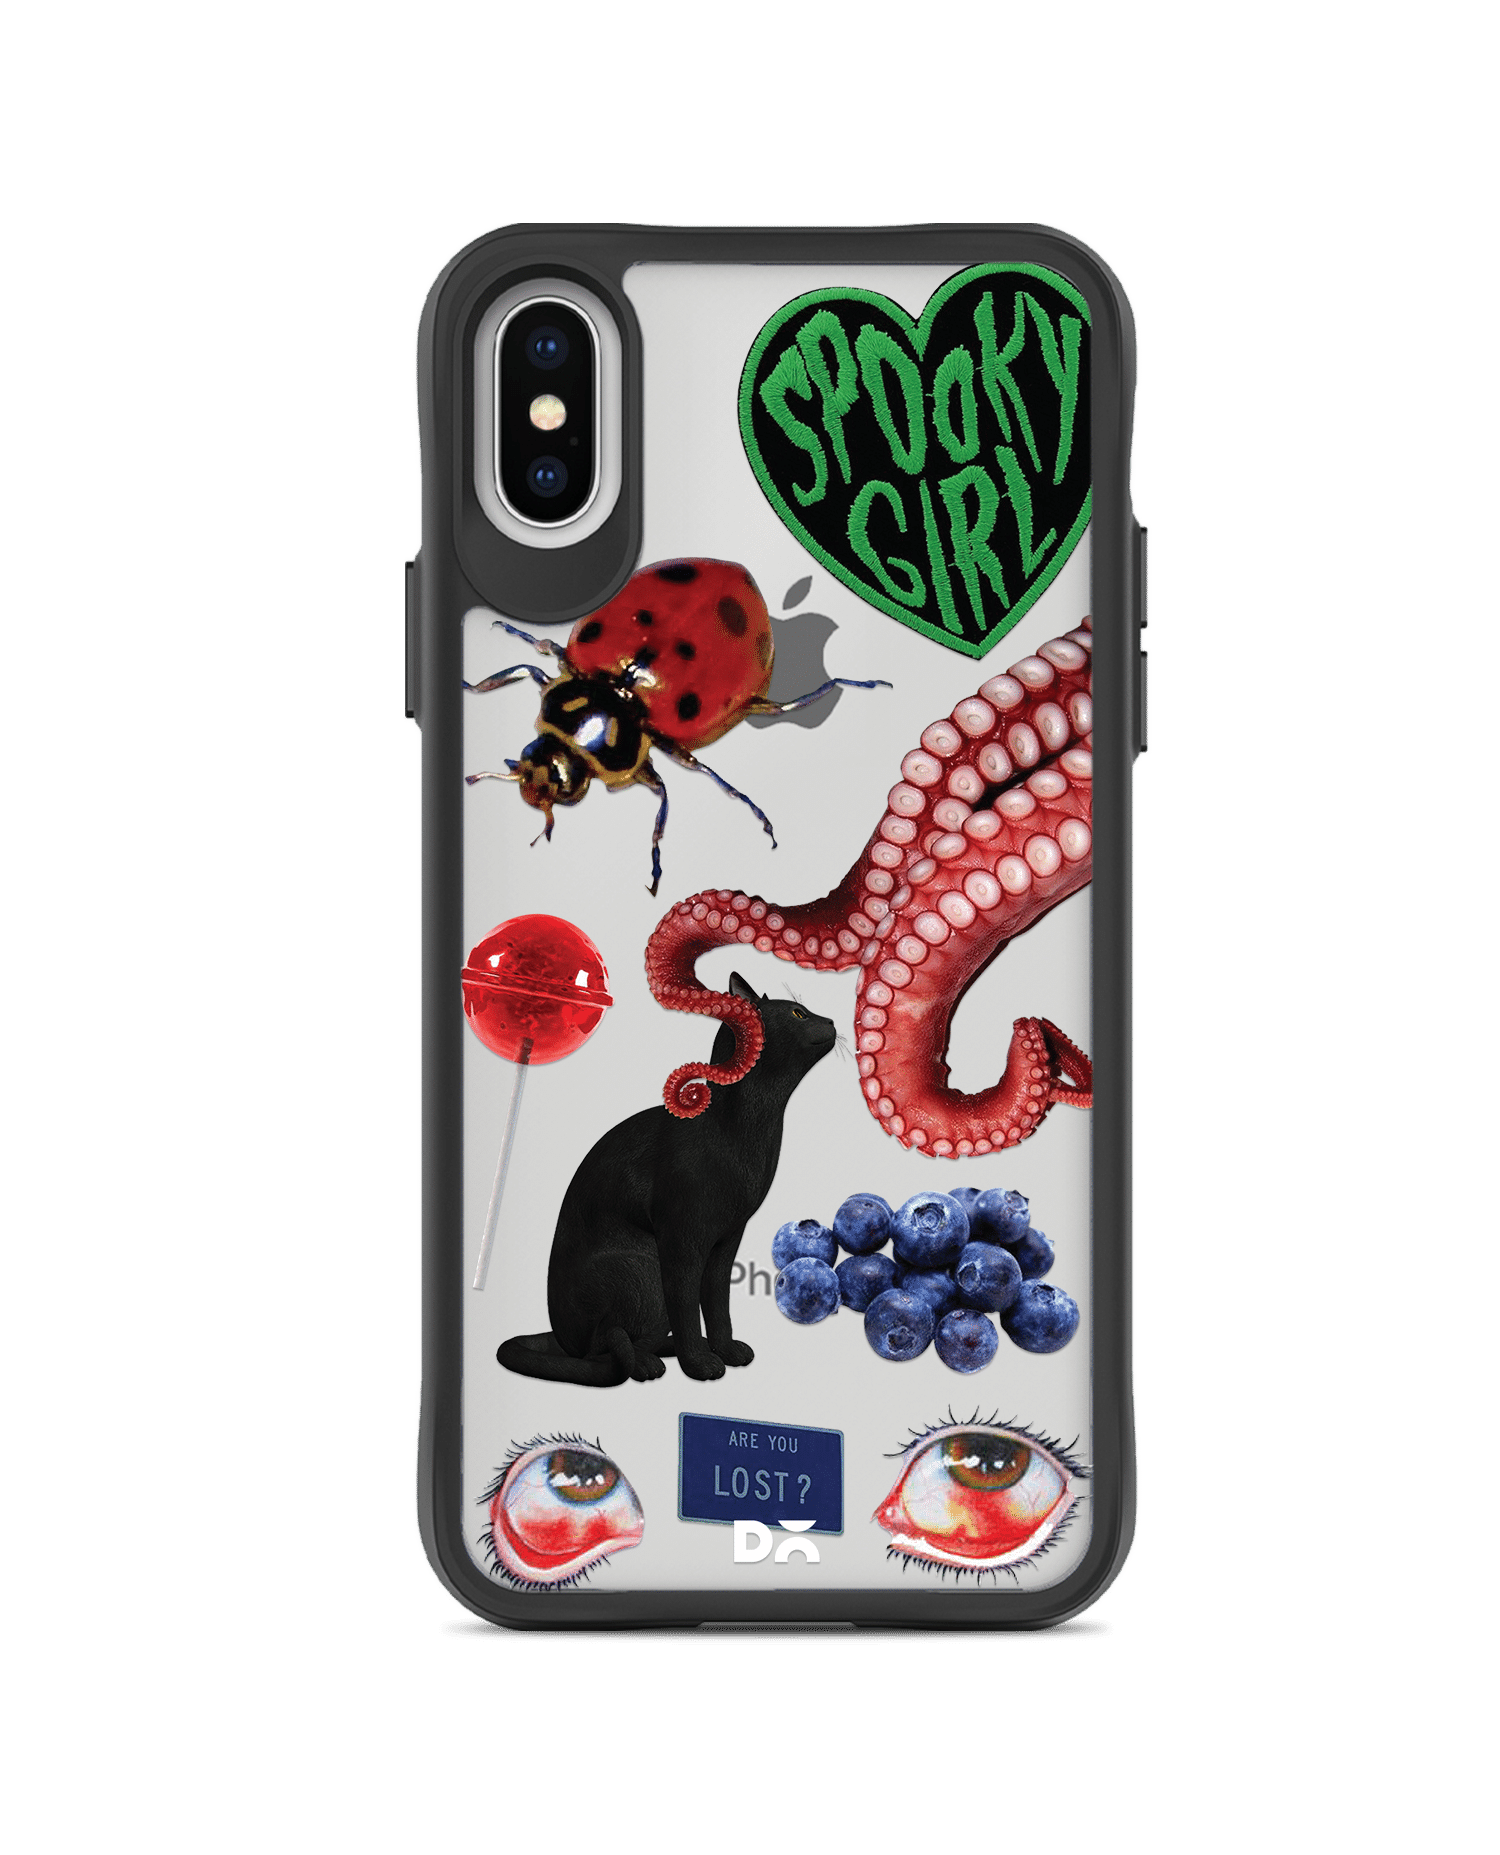 DailyObjects Red High Black Hybrid Clear Case Cover For iPhone XS